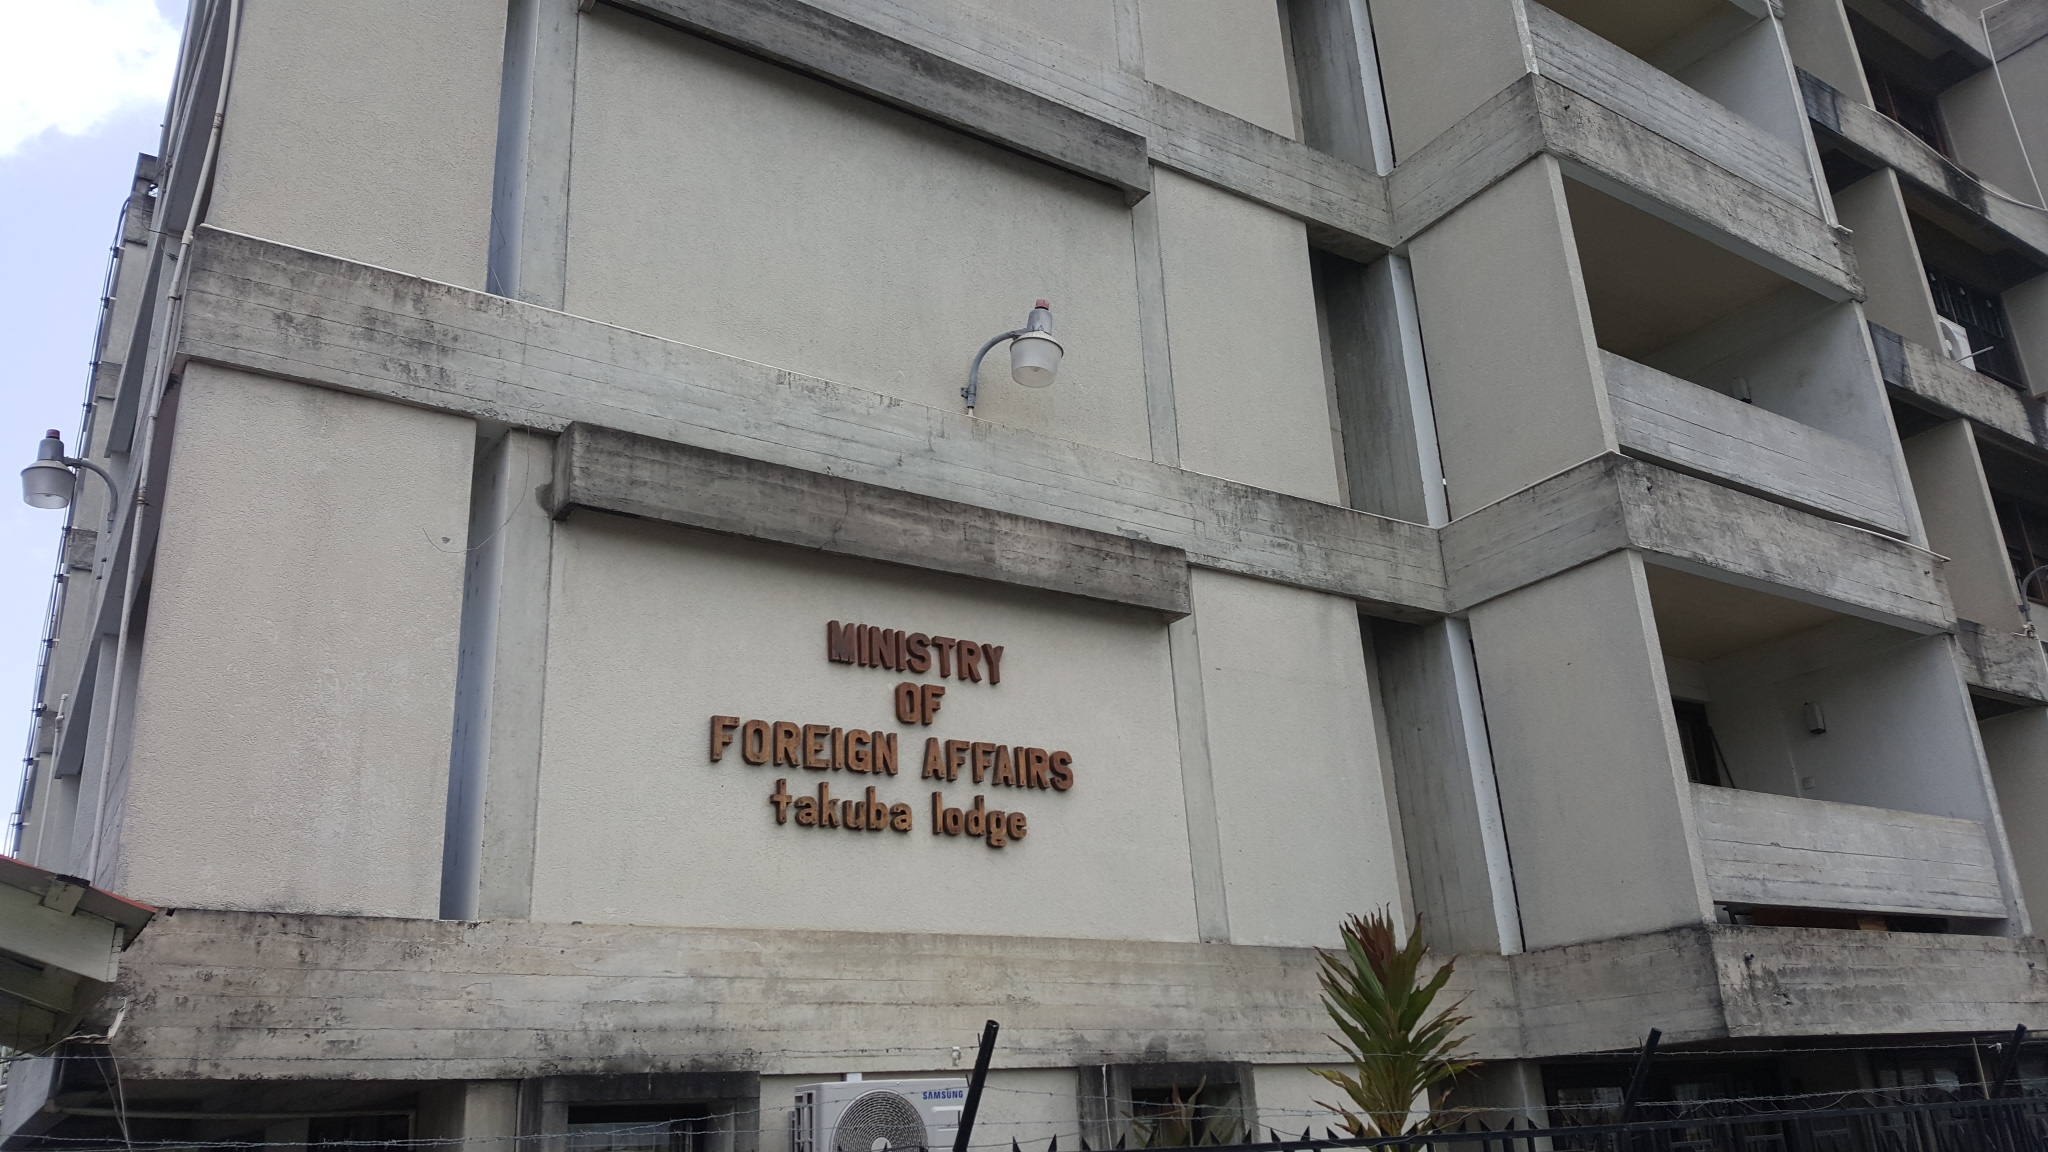 Headquarters of Guyana's Ministry of Foreign Affairs, located in Georgetown, capital of Guyana. Photo: File photo.